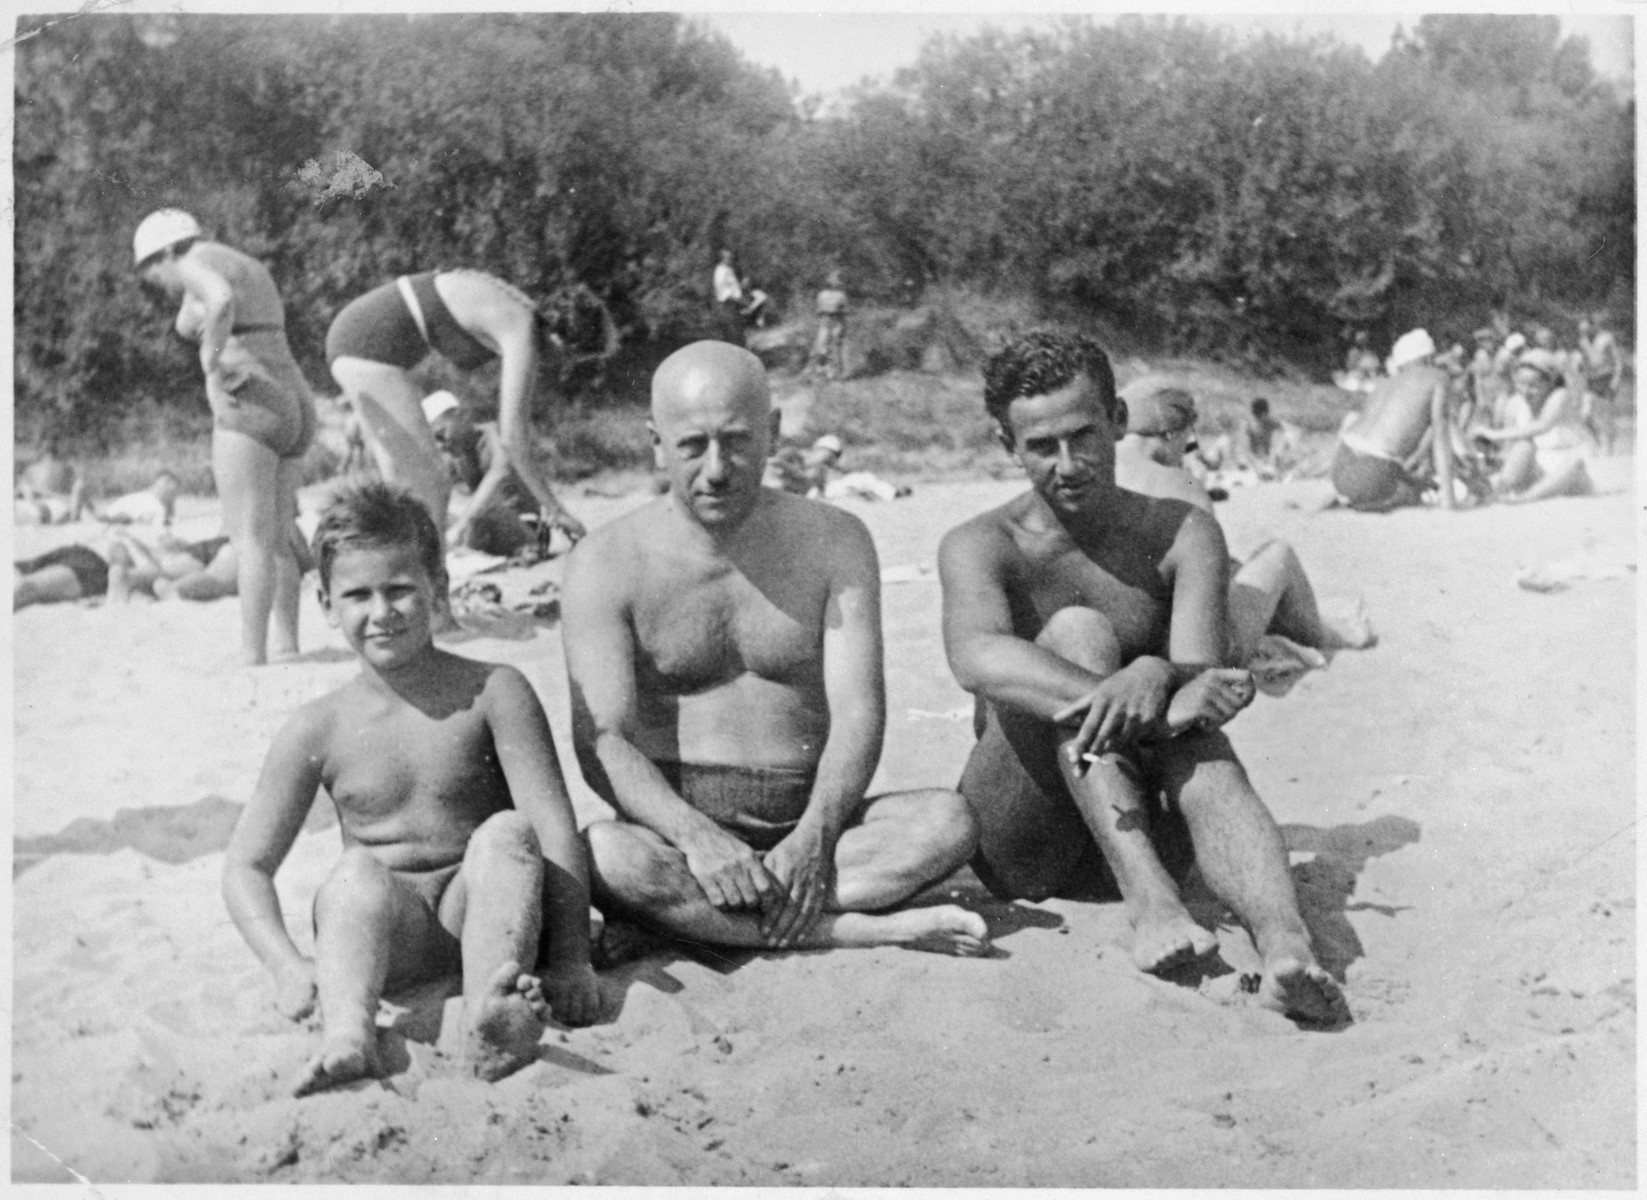 A Jewish father with his two sons at Niemen Beach in Grodno, Poland.

Pictured are Alexander Blumstein (far left), Chaim Blumstein (middle) and Nataniel "Tolo" Blumstein (right).